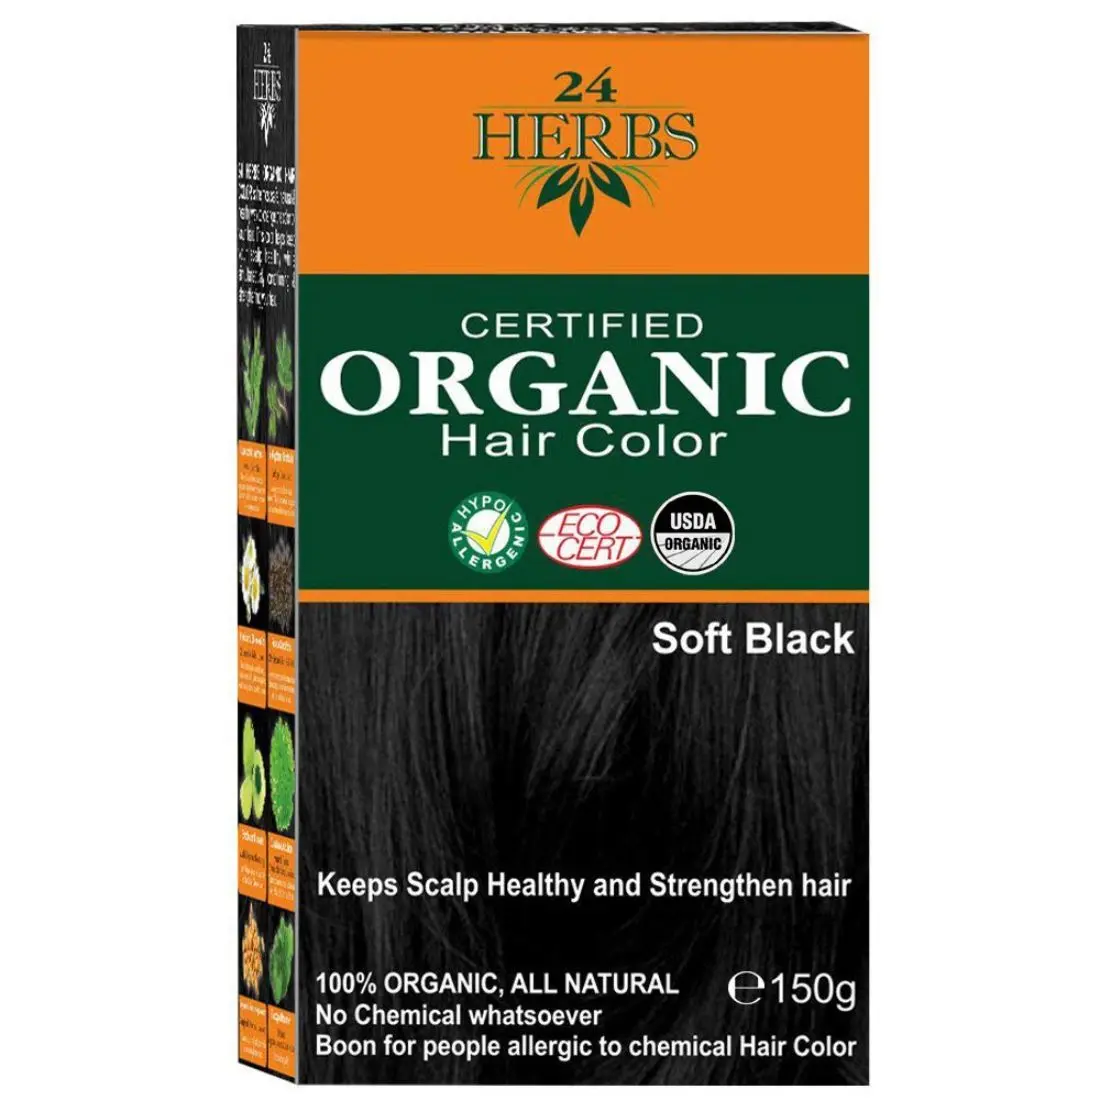 24 HERBS Certified Organic Hair Color Soft Black - (150 g)